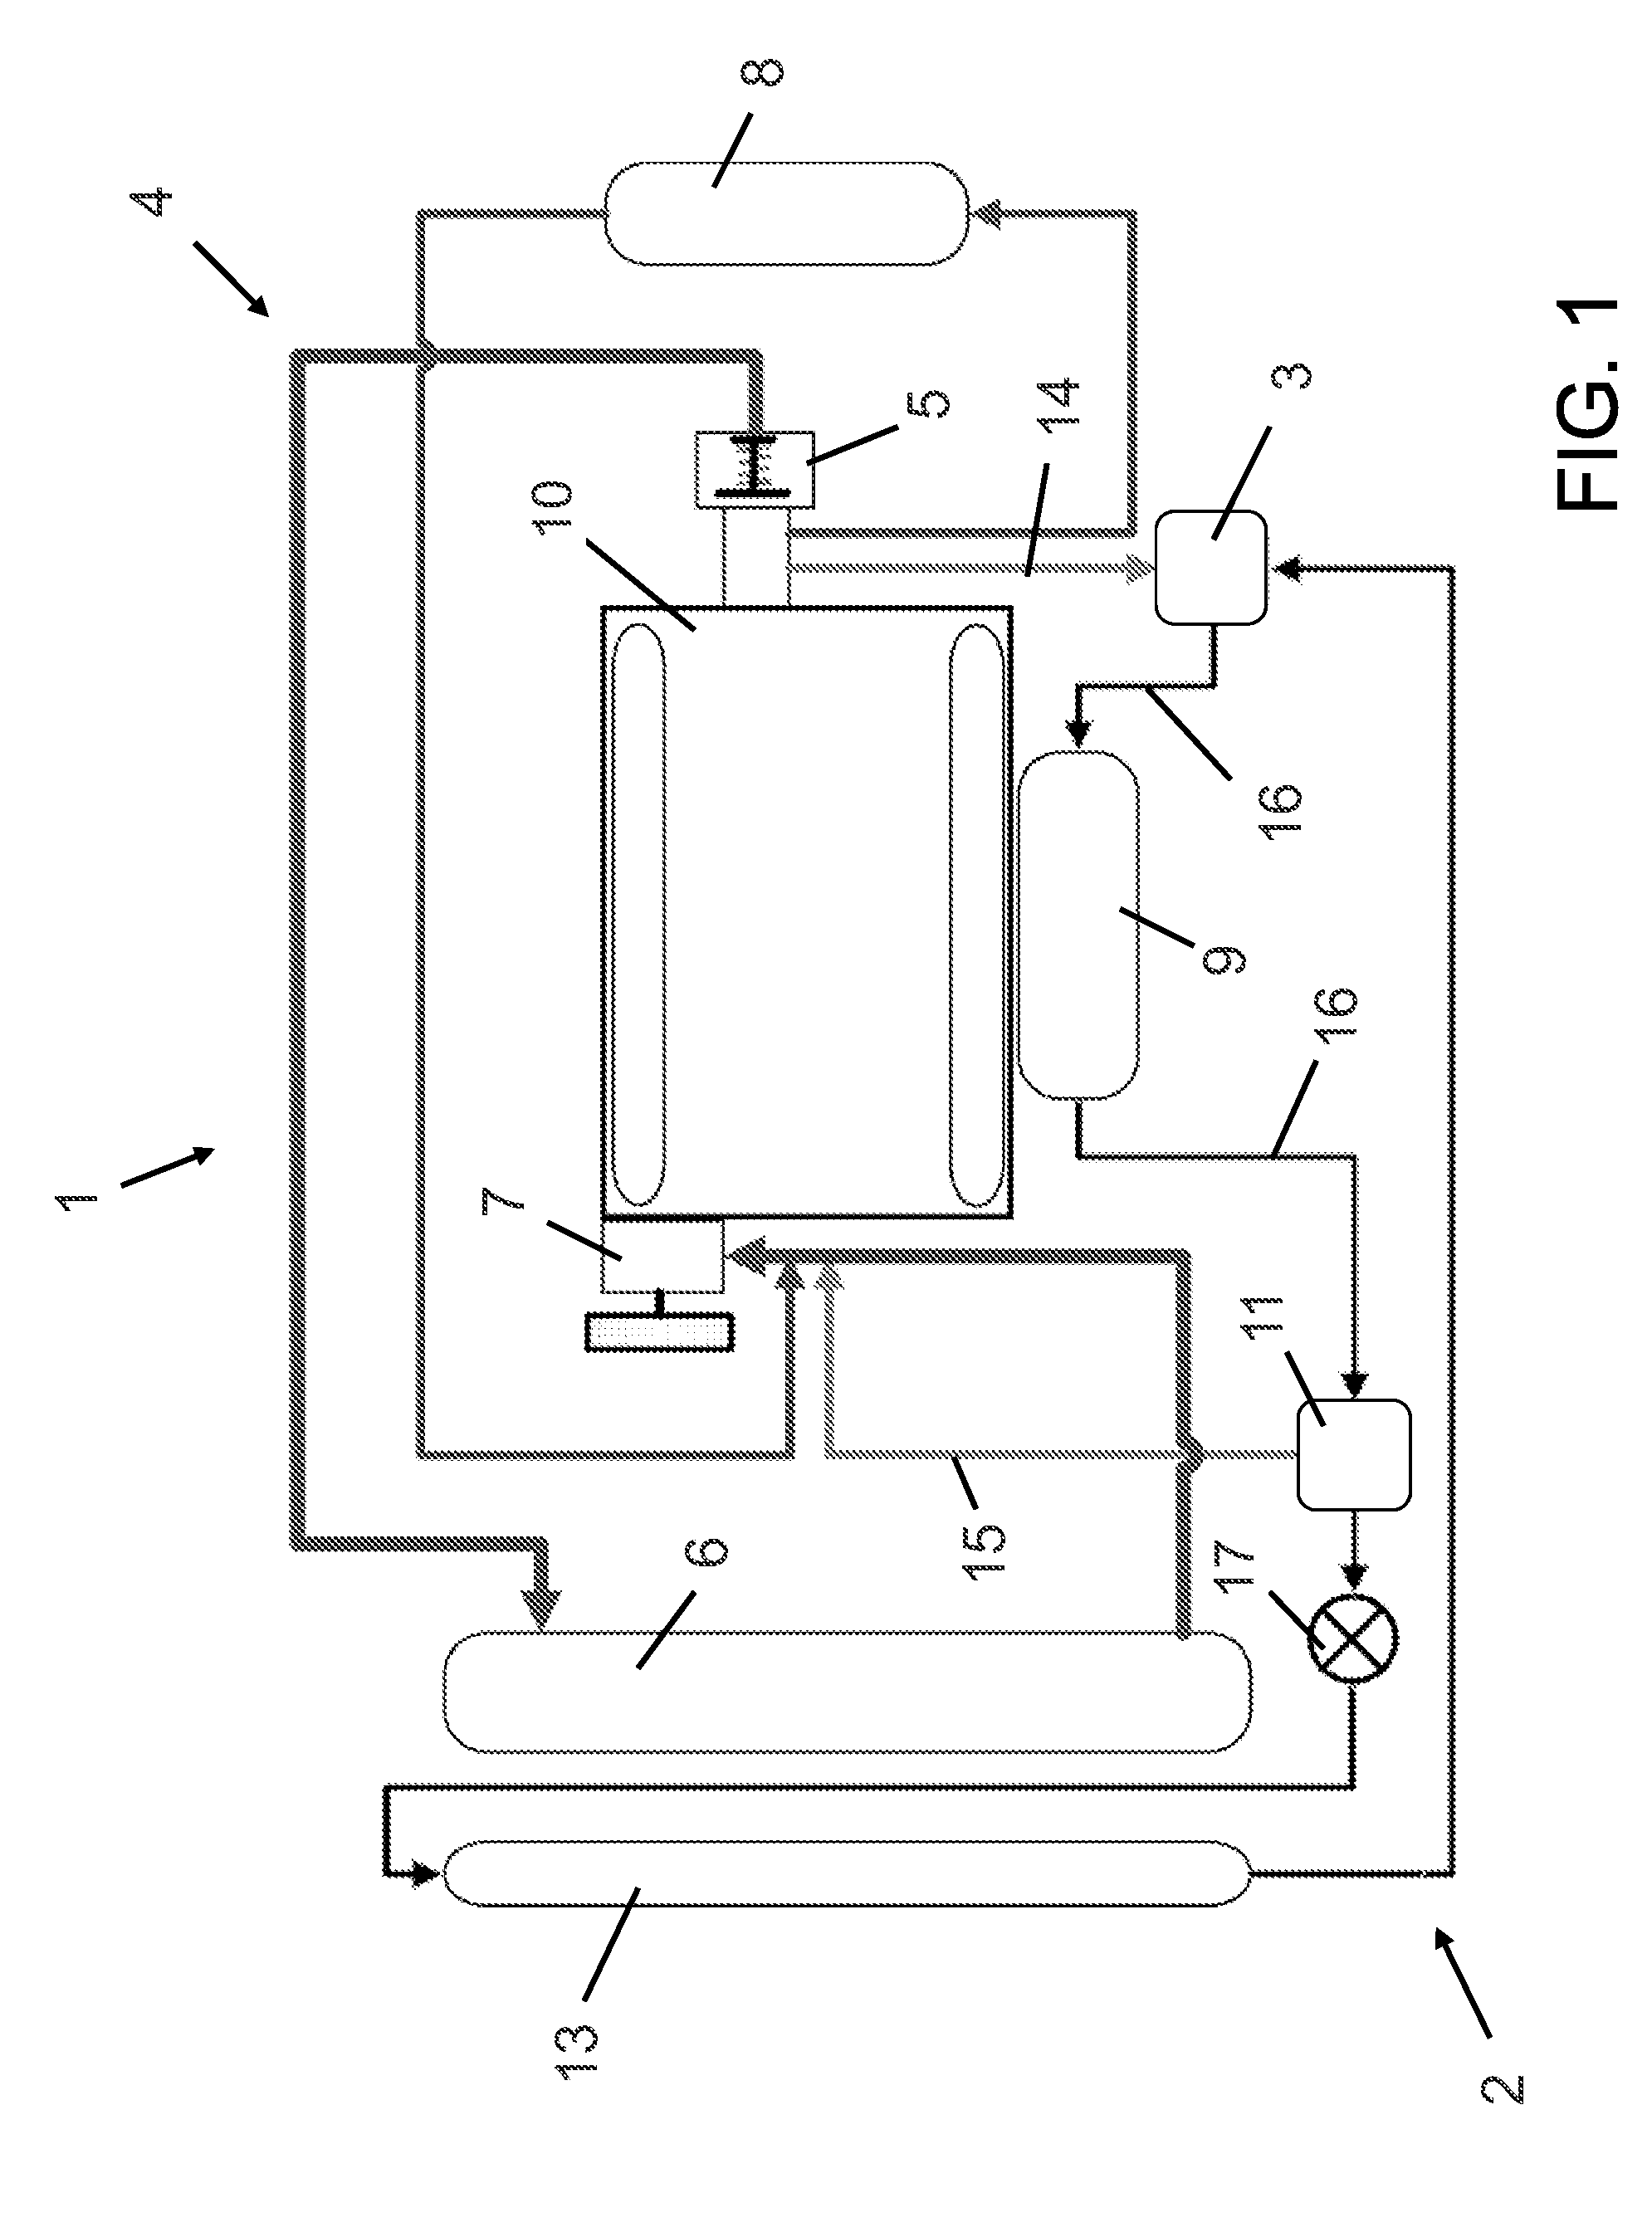 Cooling arrangement for a chargeable internal combustion engine